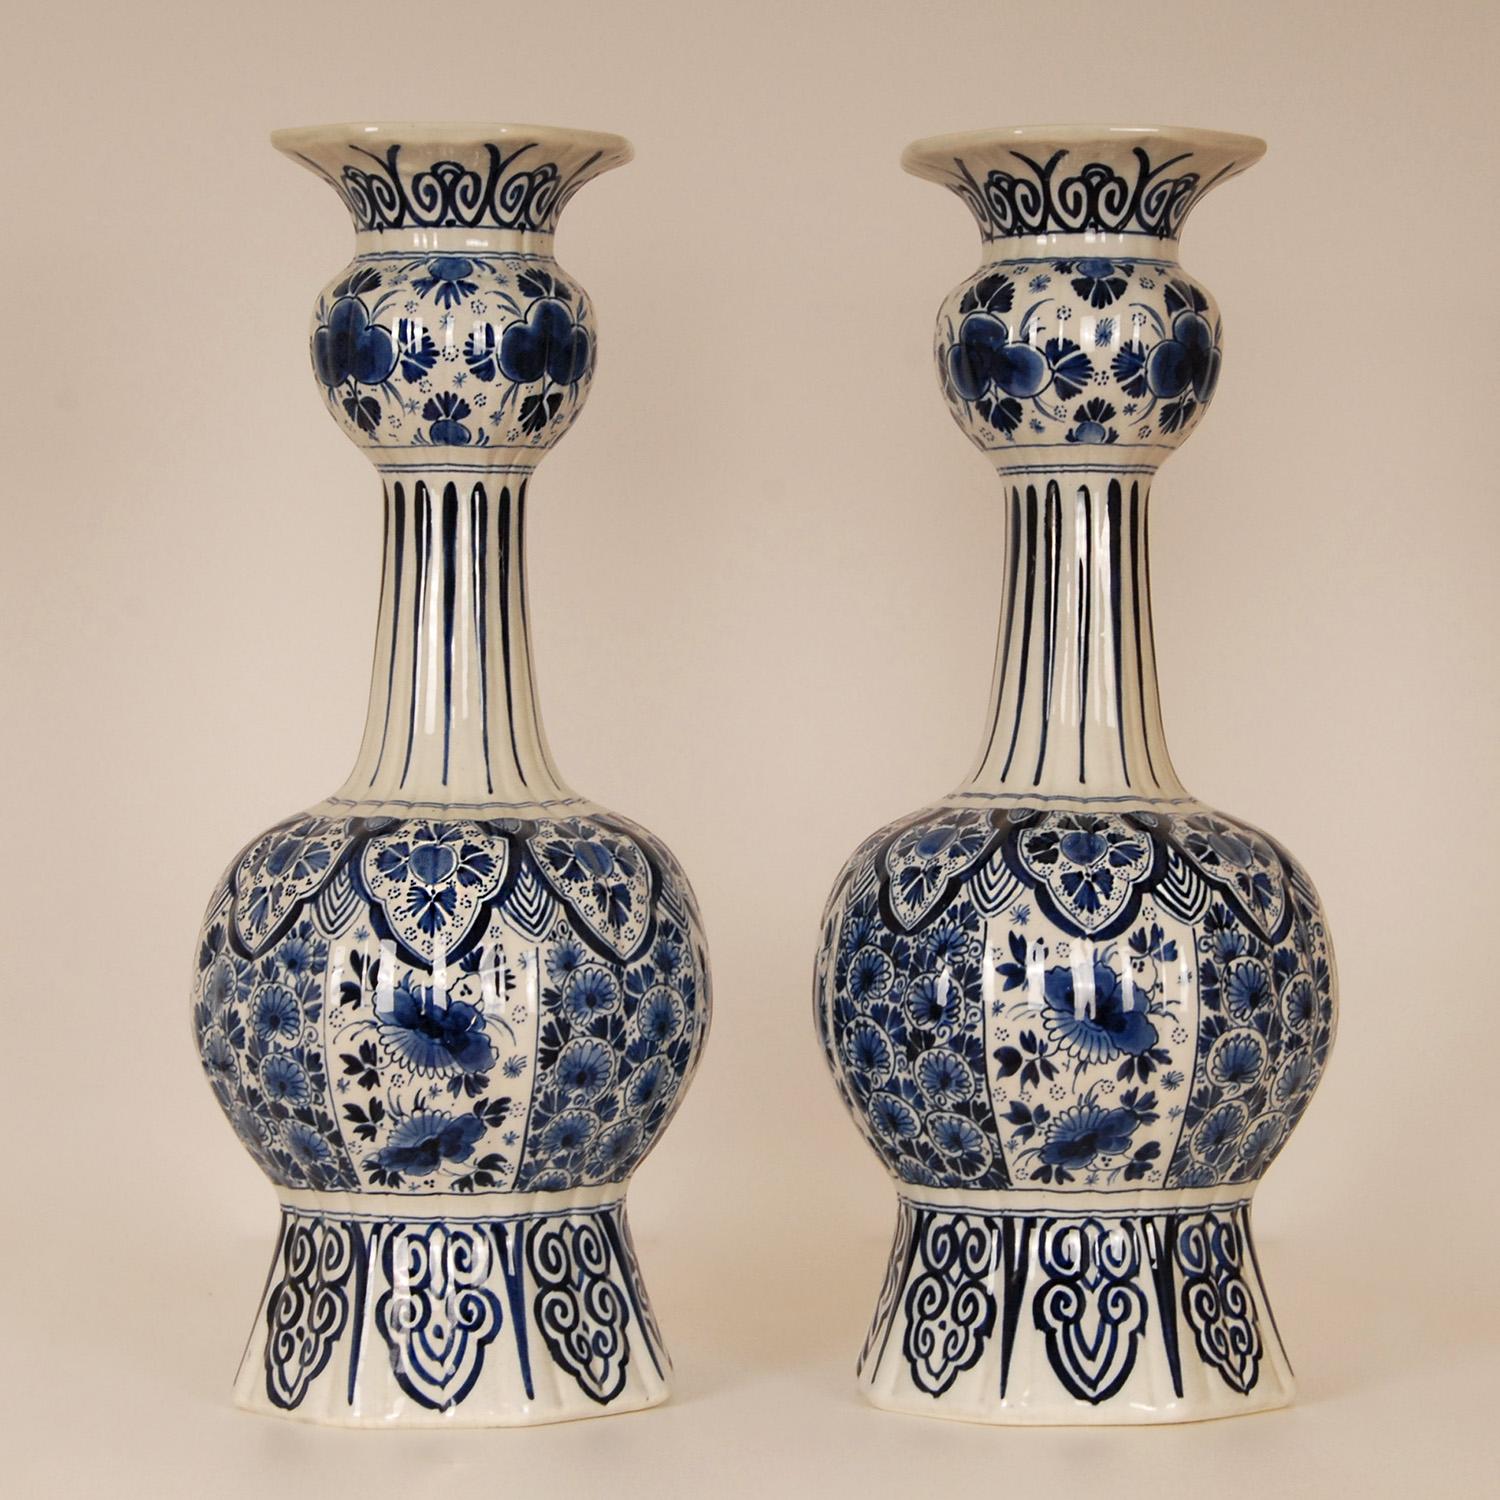 A pair Dutch Royal Delft vases.
Tall decorative vases on an octagonal foot.
The vases are hand crafted and hand painted in enchanting blue colors, blue camaieu.
Floral decoration with peacock birds
Origin The Netherlands, Delft 1907
Condition: Good